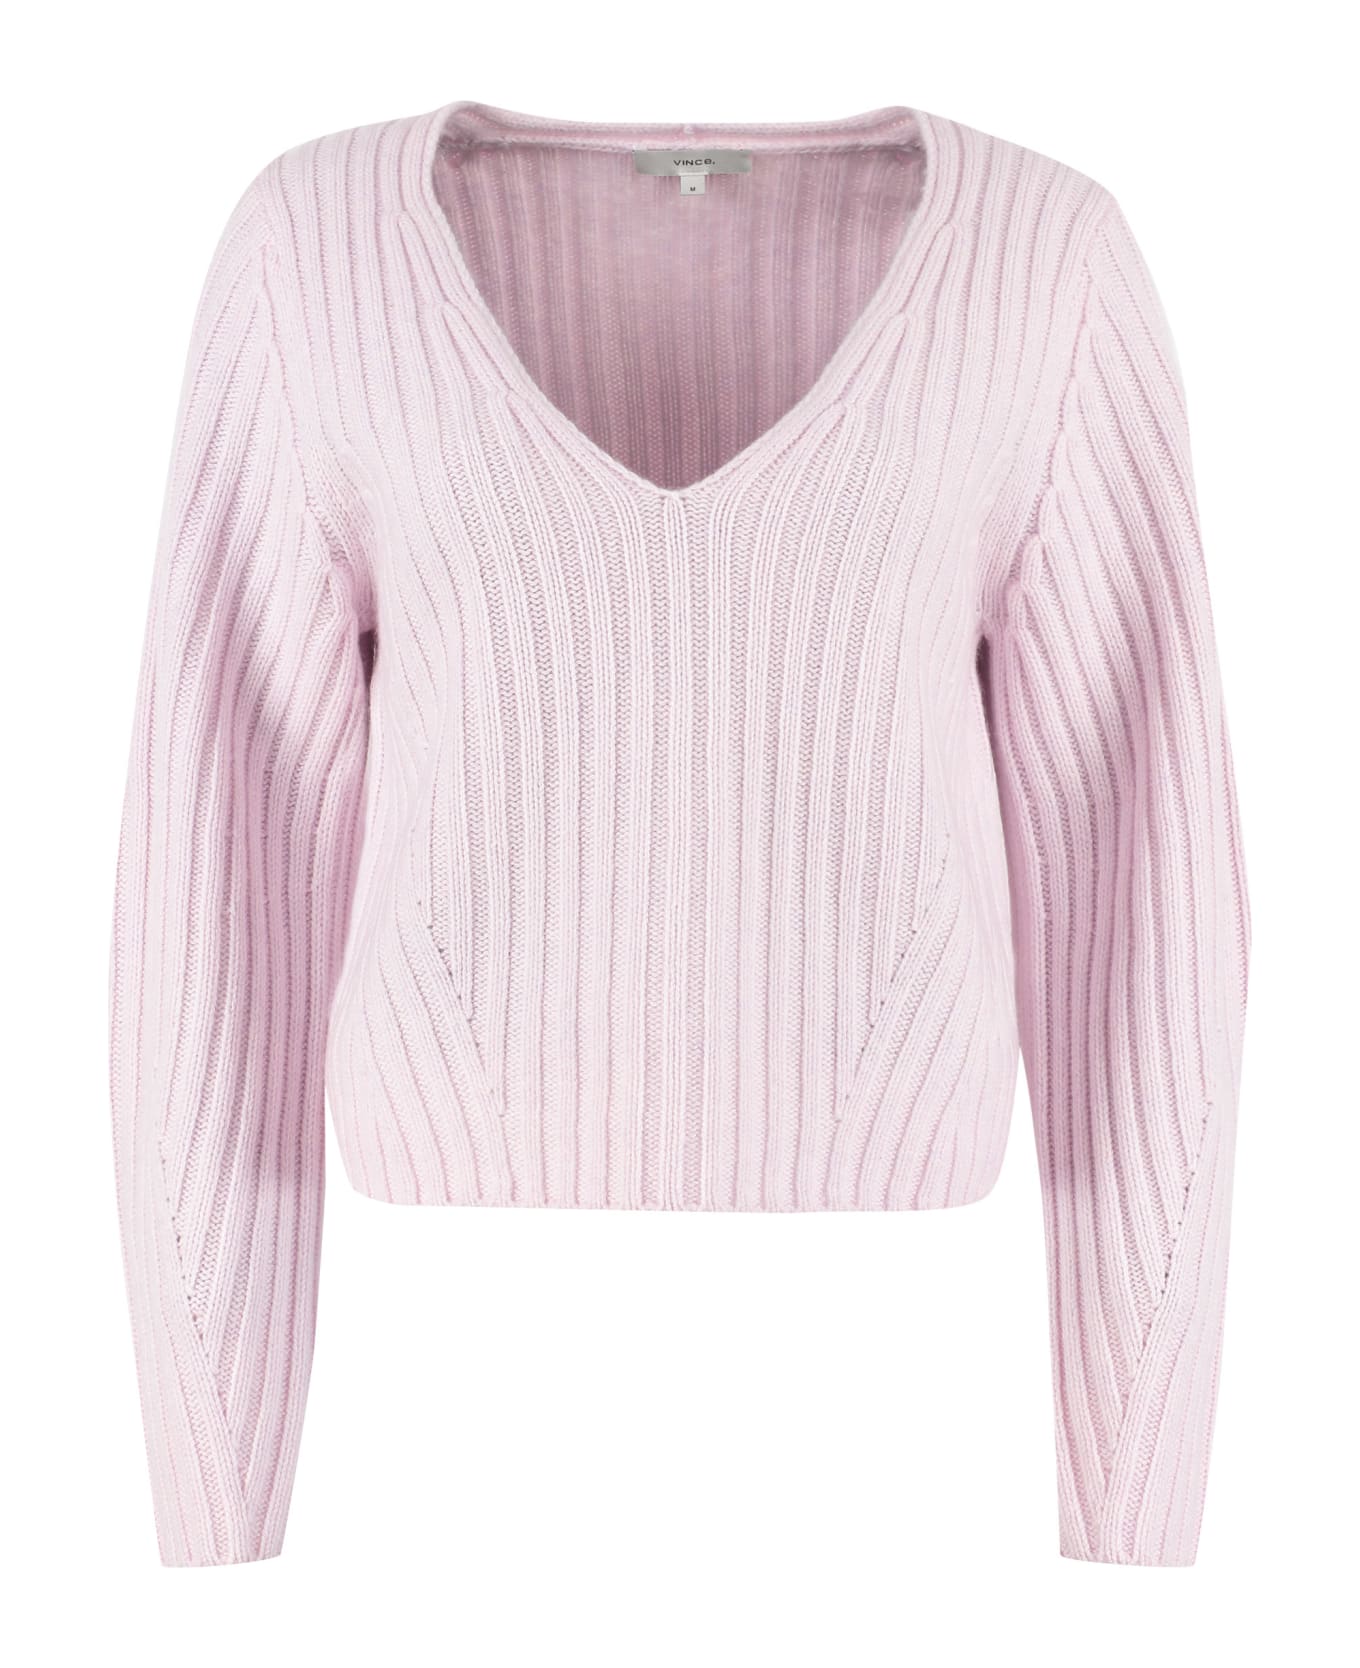 Vince Wool And Cashmere Sweater - Pink